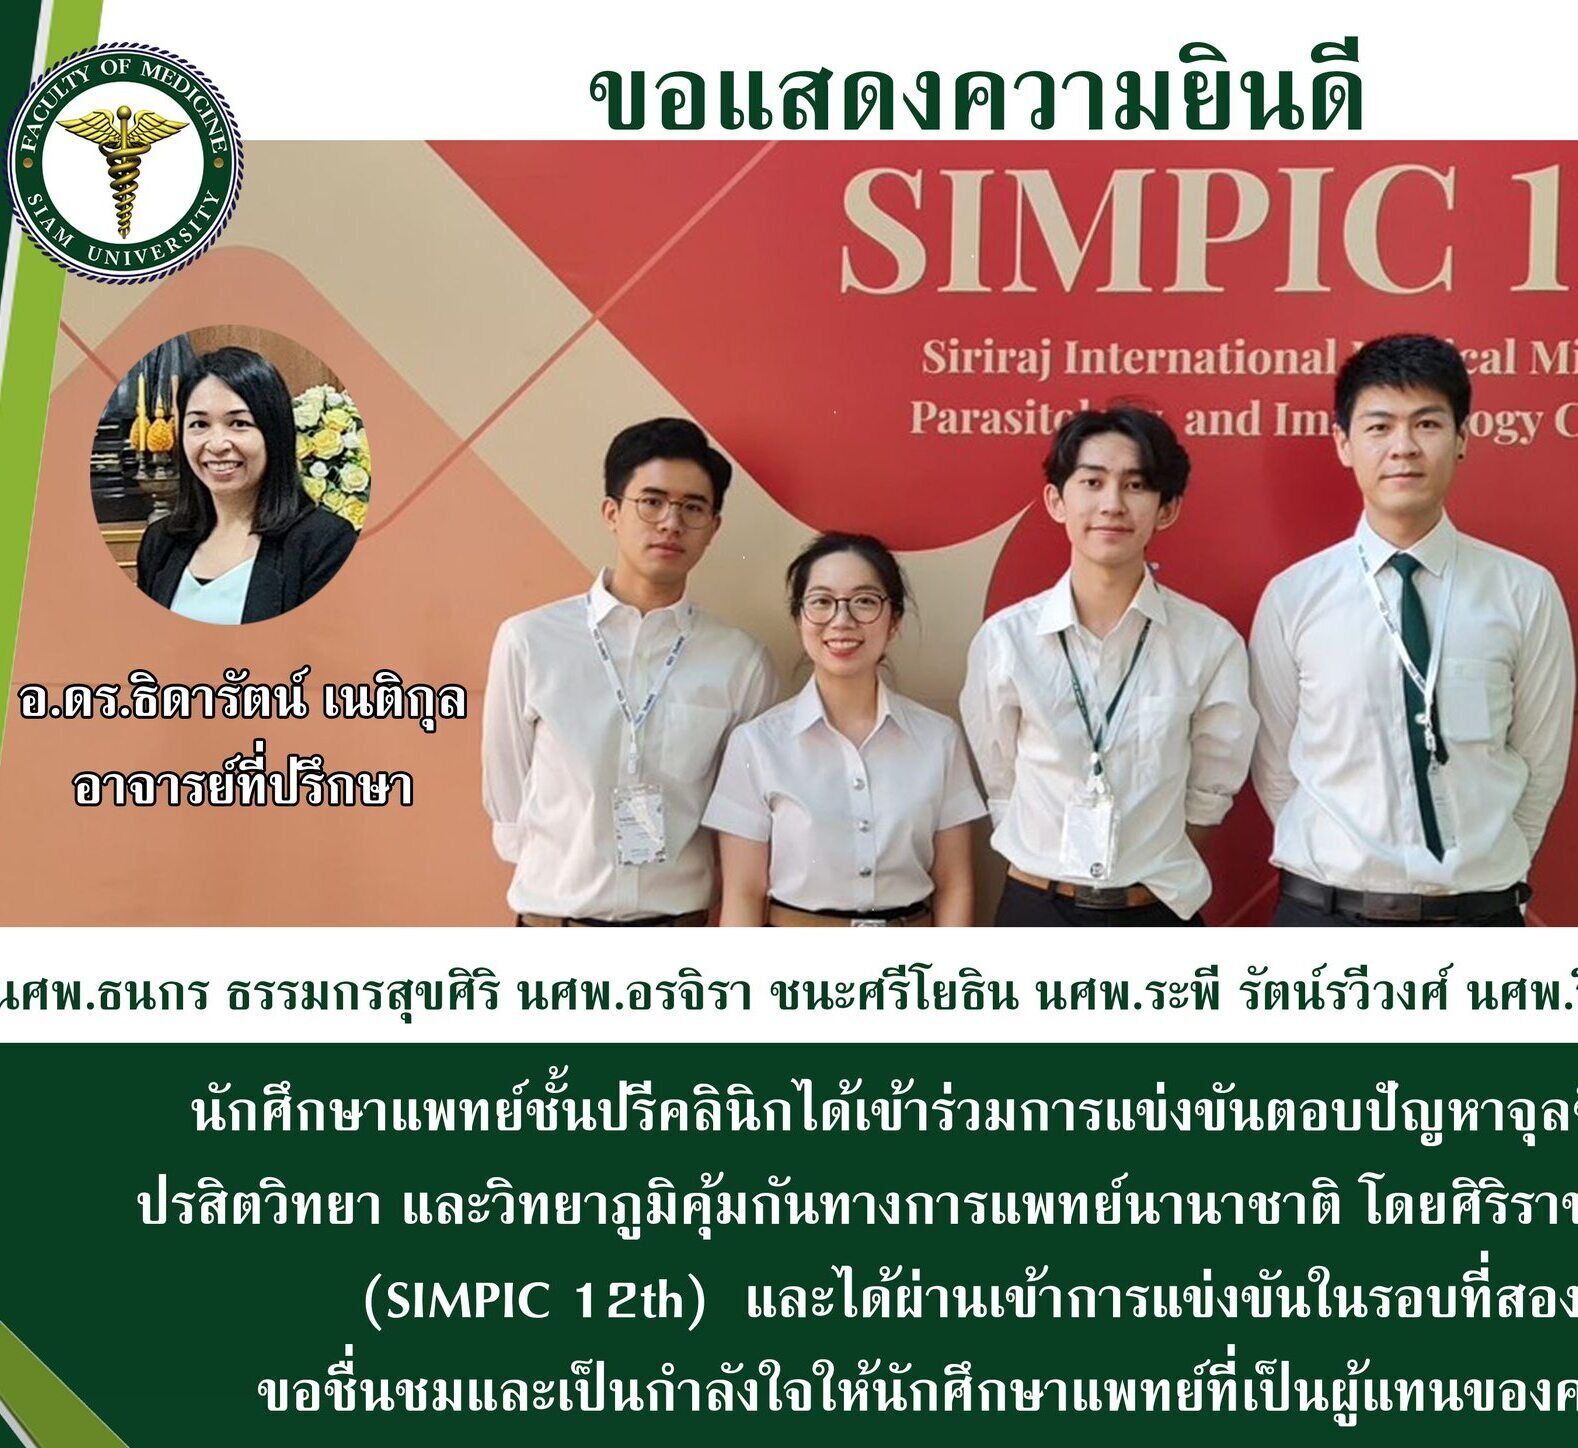 Medical students joined the competition organized by Siriraj Hospital.